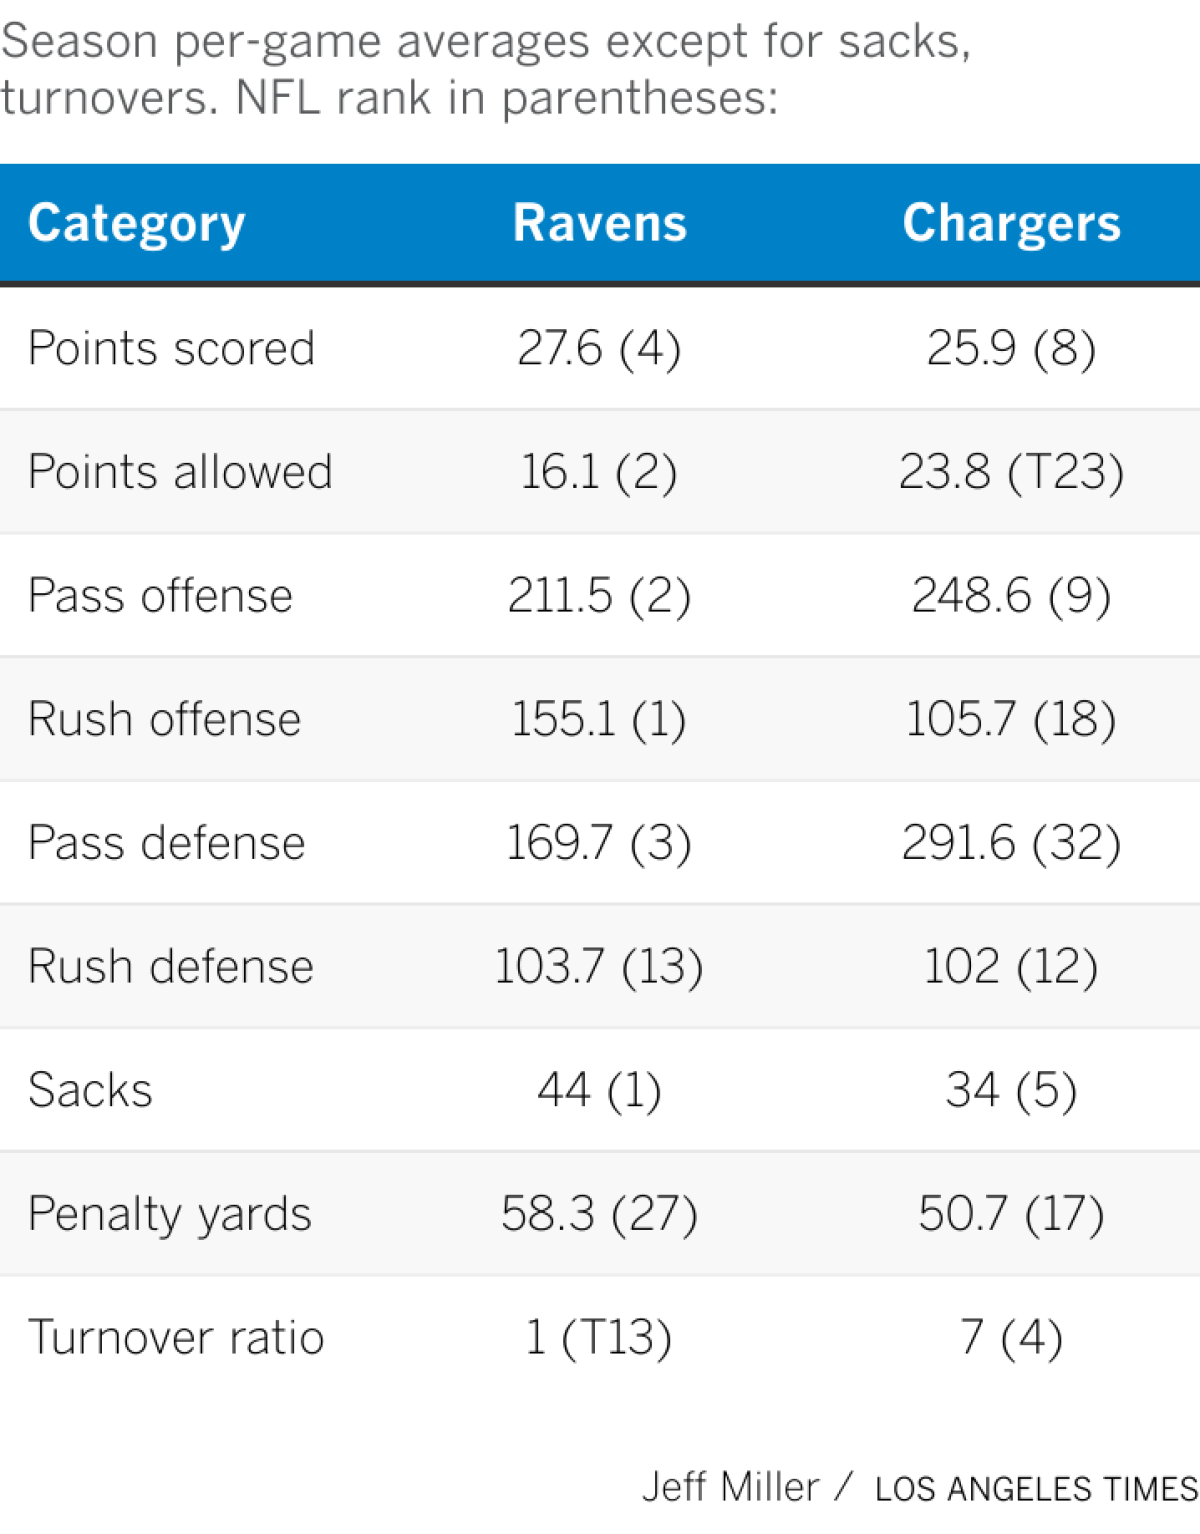 A chart comparing season stats for the Chargers and Ravens.